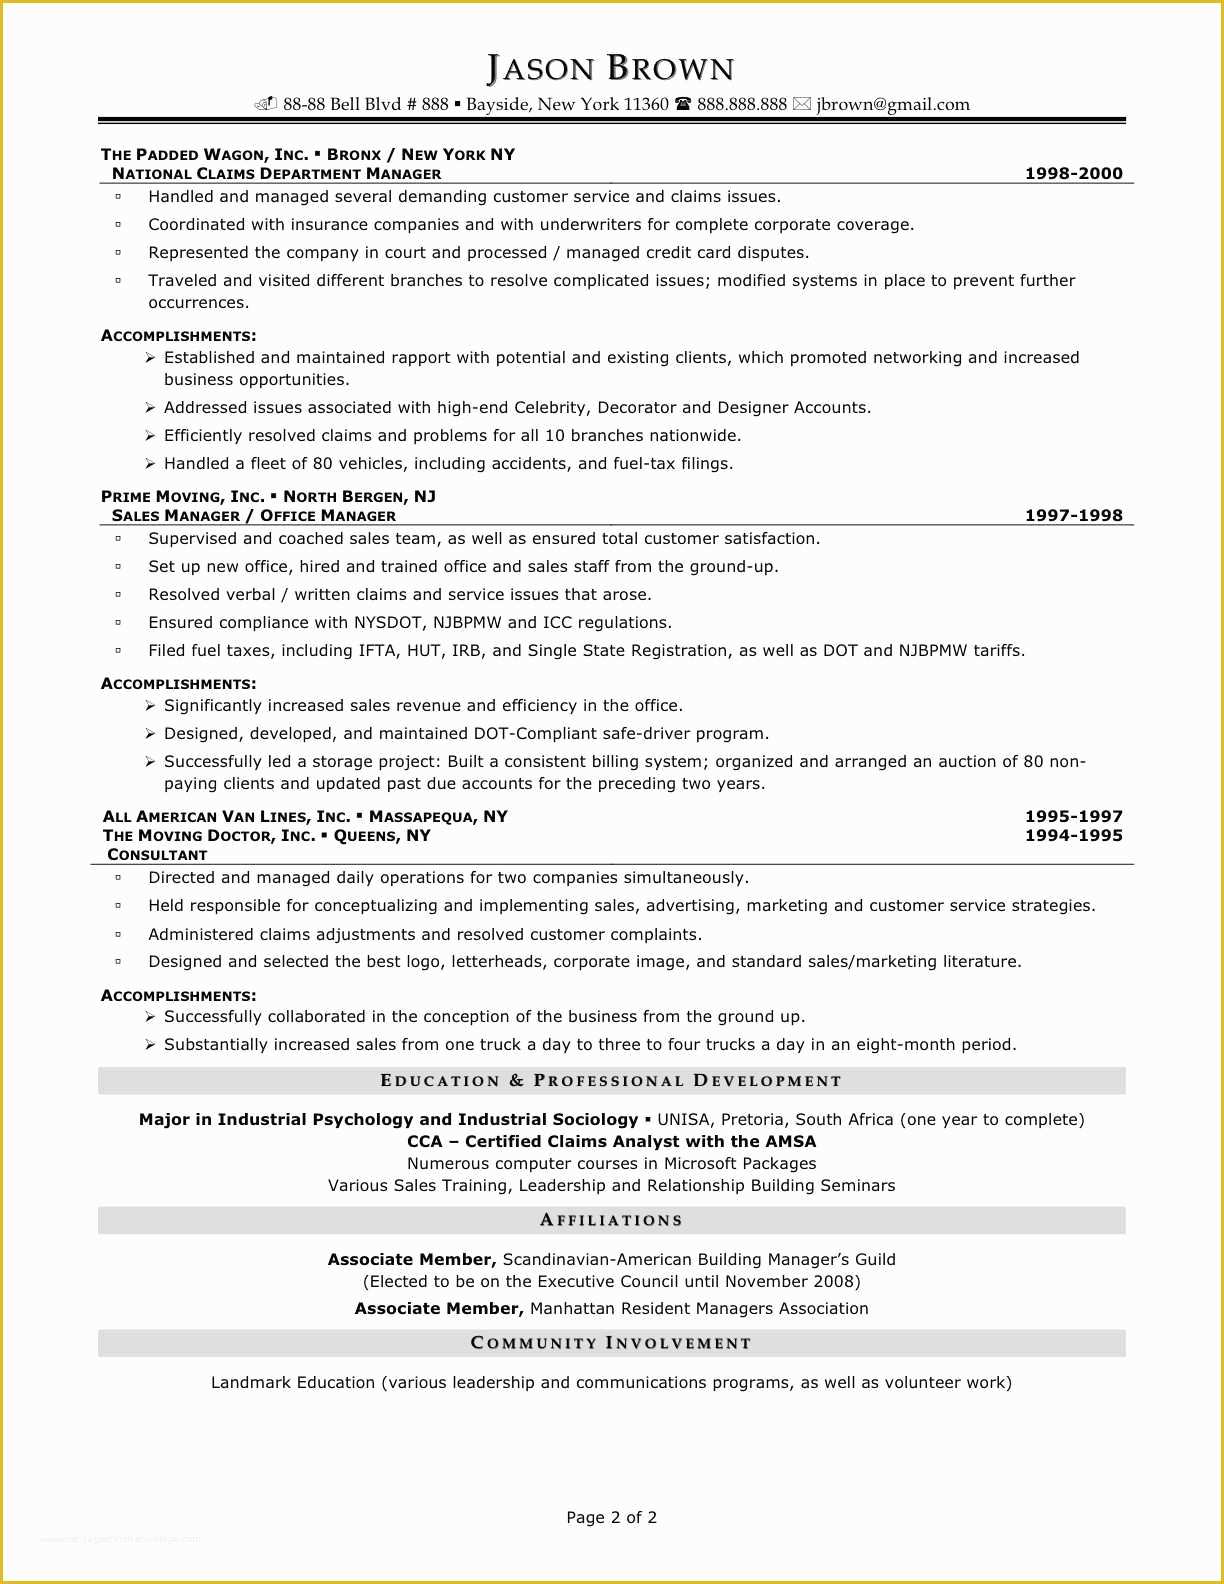 fancy-resume-templates-free-of-43-great-fancy-resume-templates-xd-i